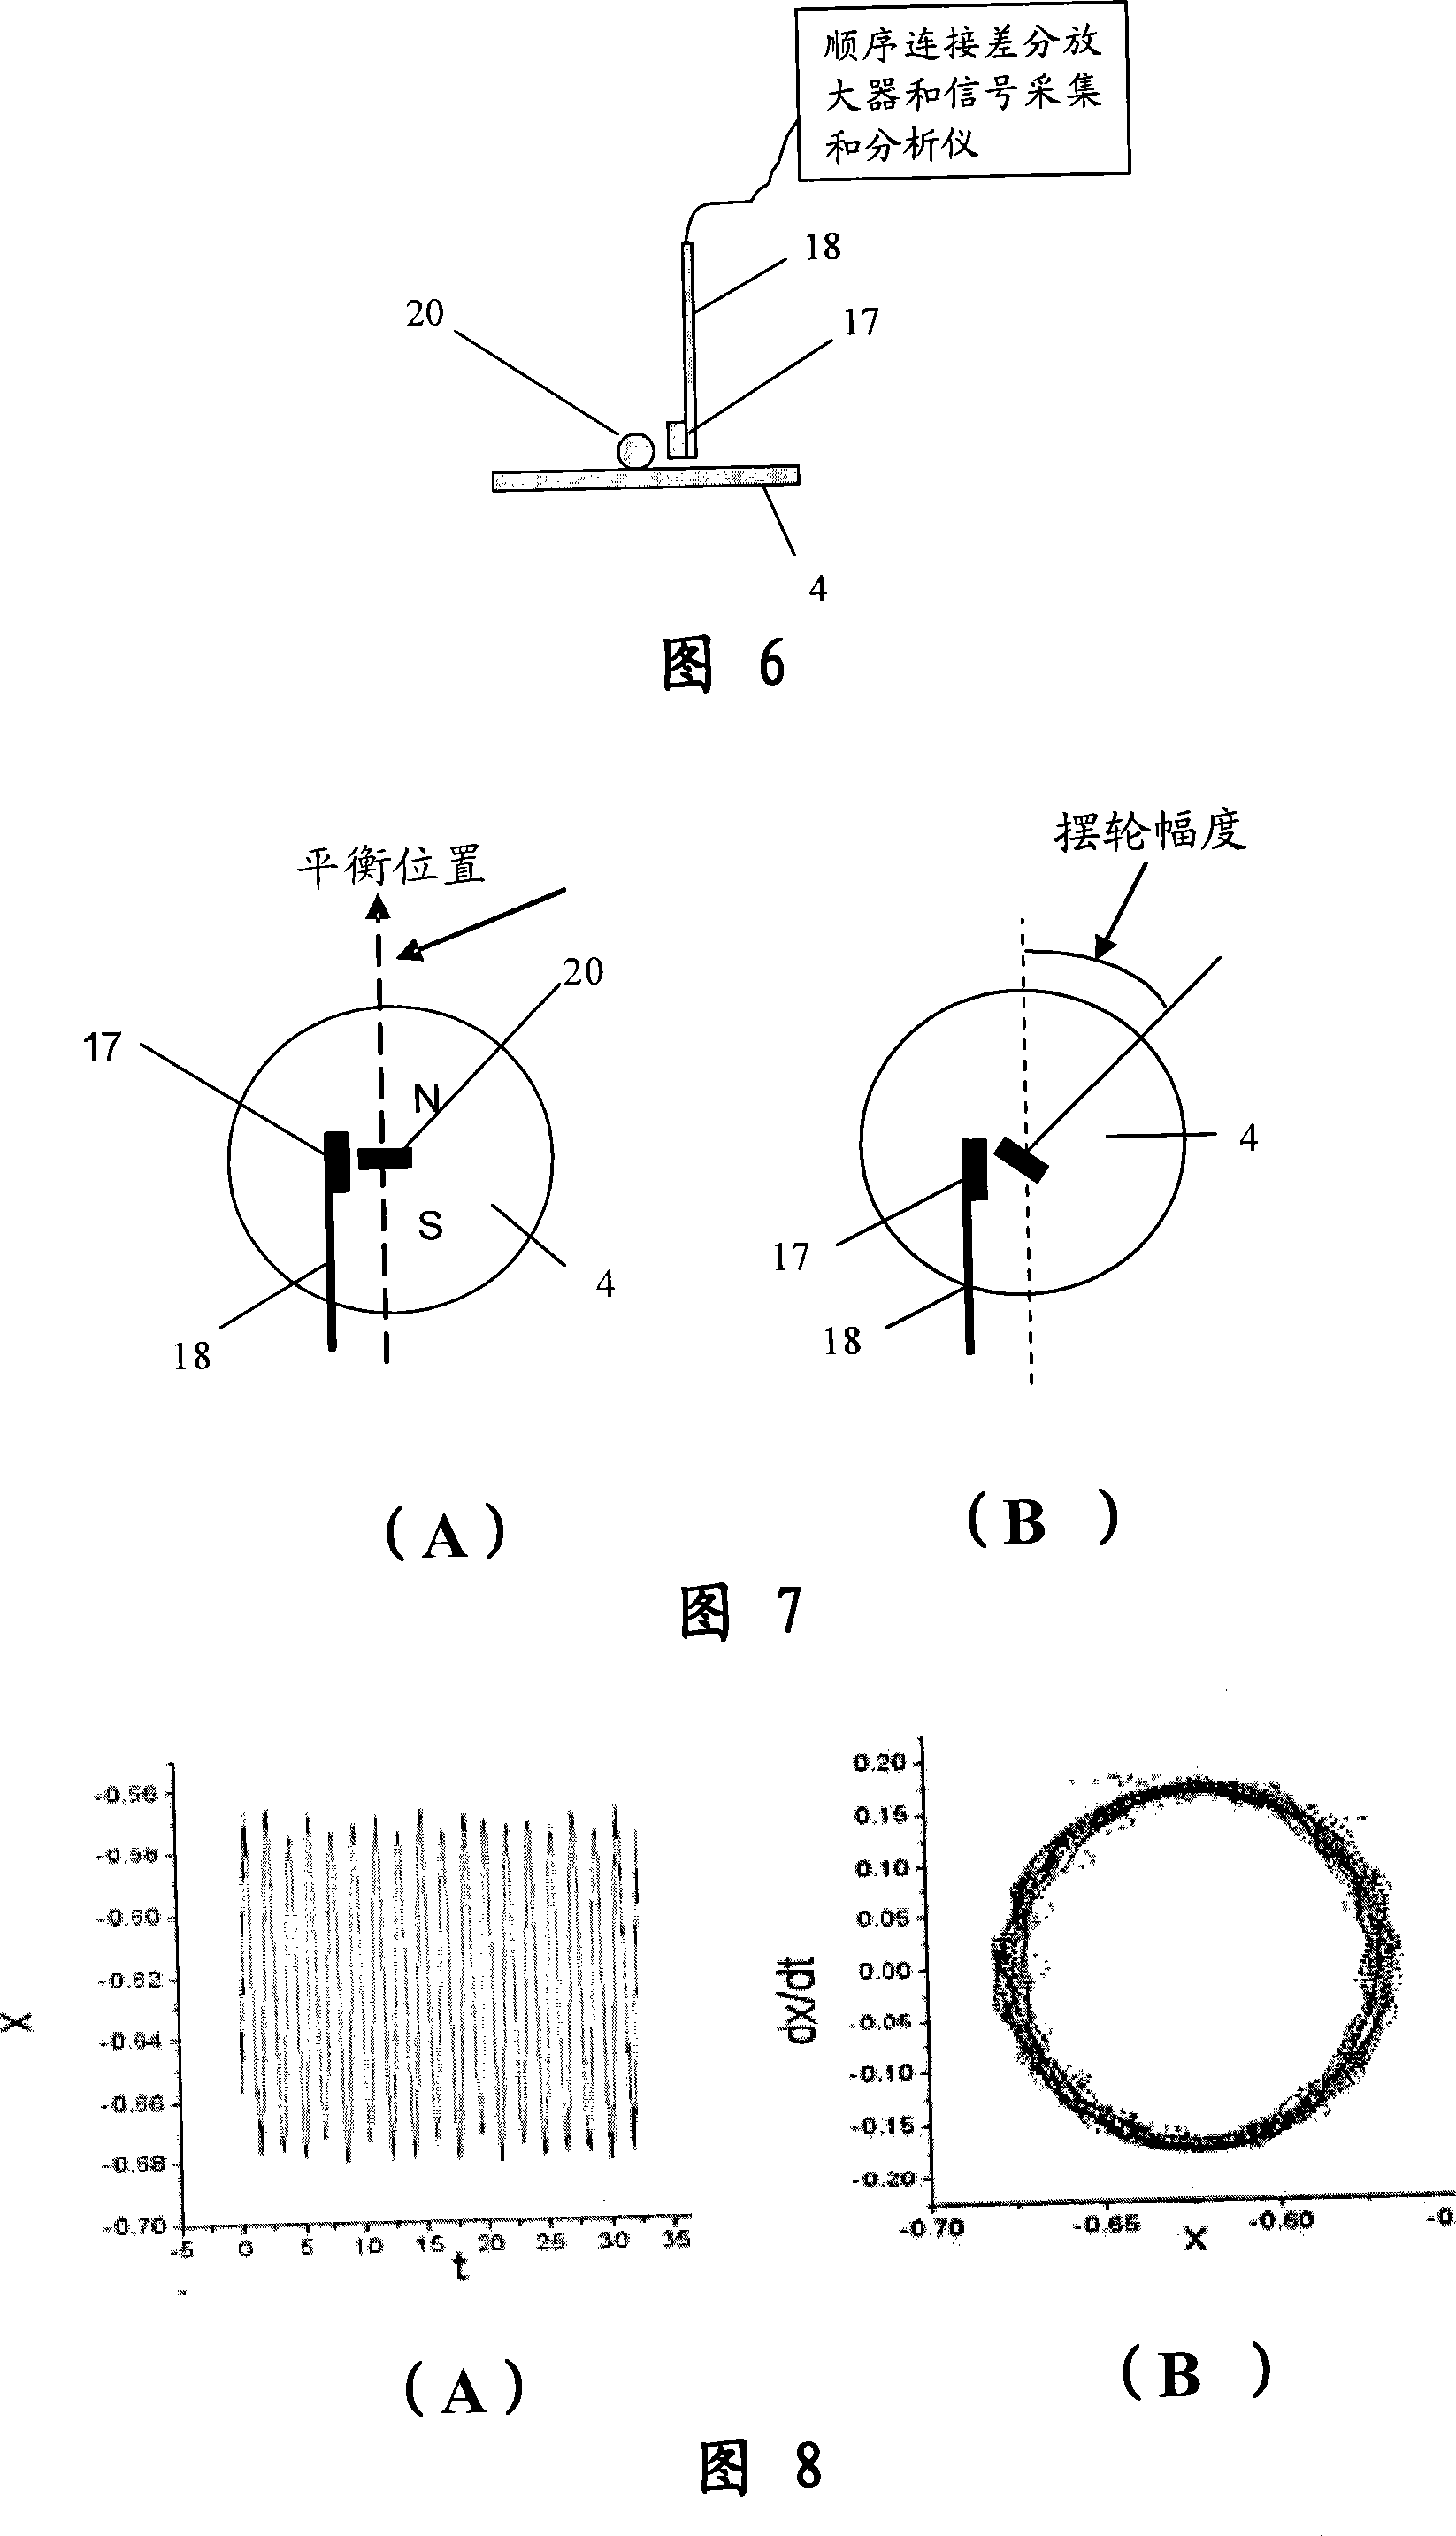 Method for collecting boer resonance instrument movement state data based on hall element